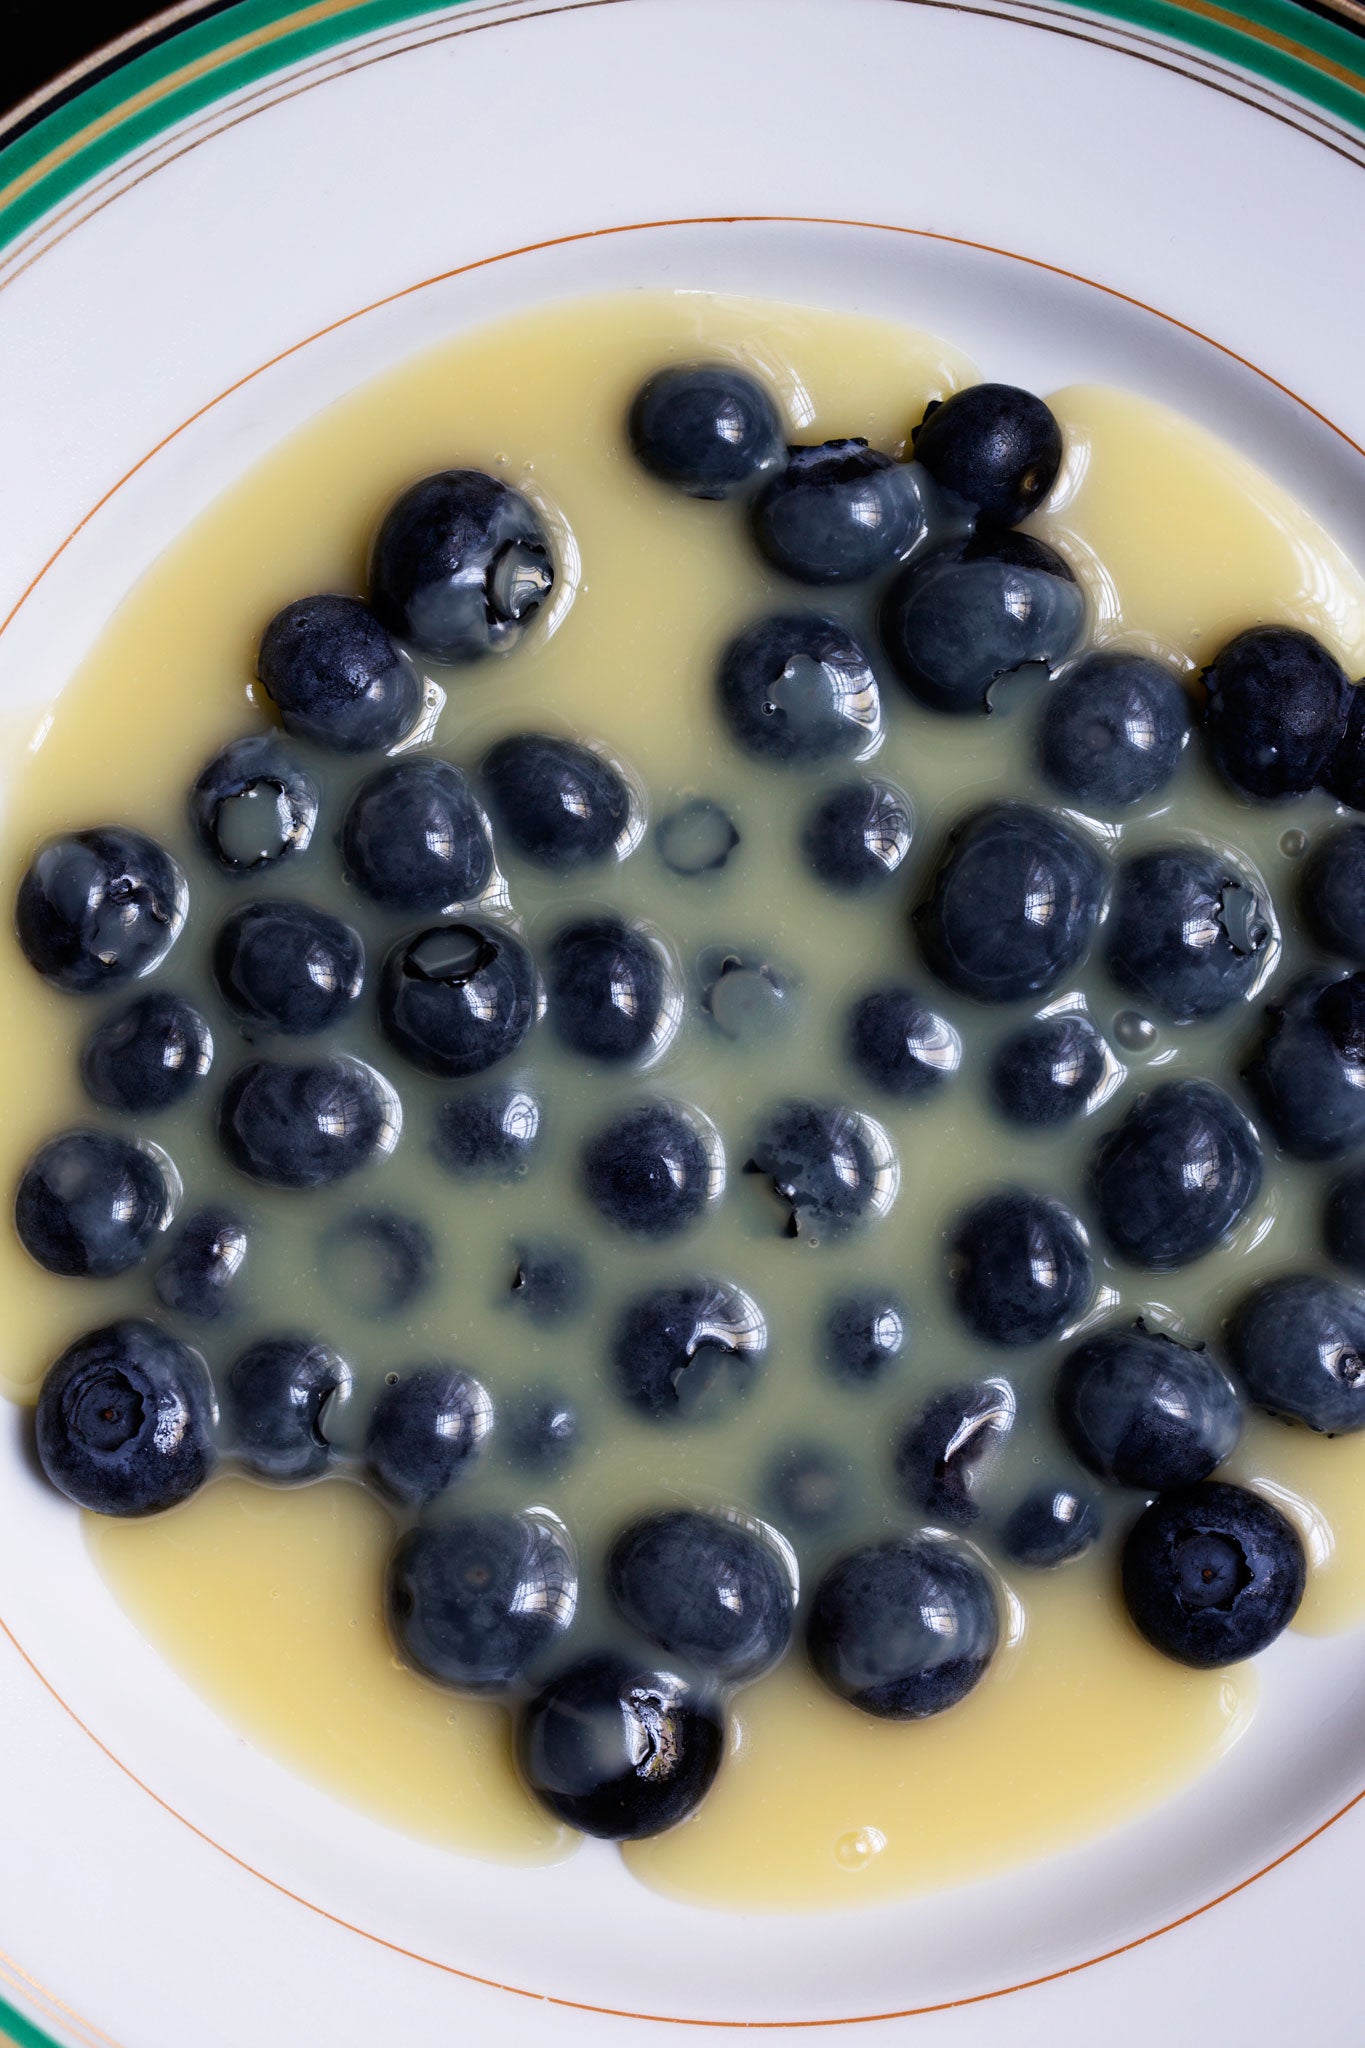 Mark's iced blueberries with hot white chocolate sauce is one of the easiest desserts to prepare